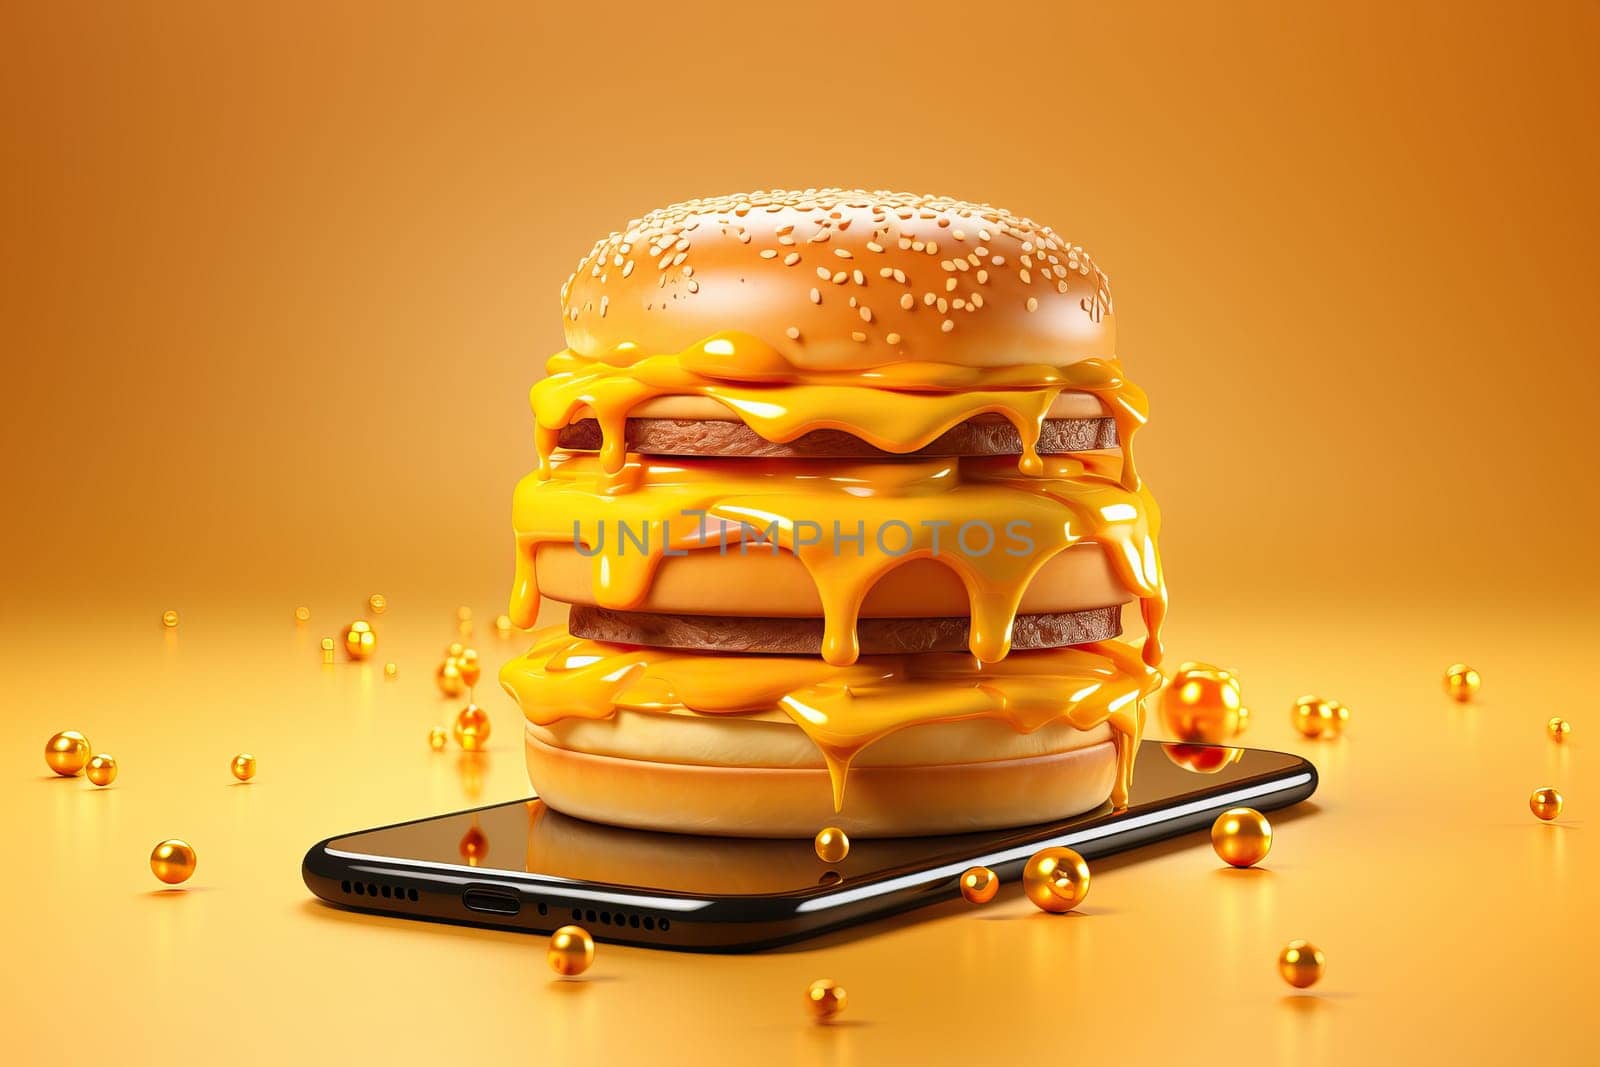 The concept of ordering burgers and fast food using phones on a yellow background.